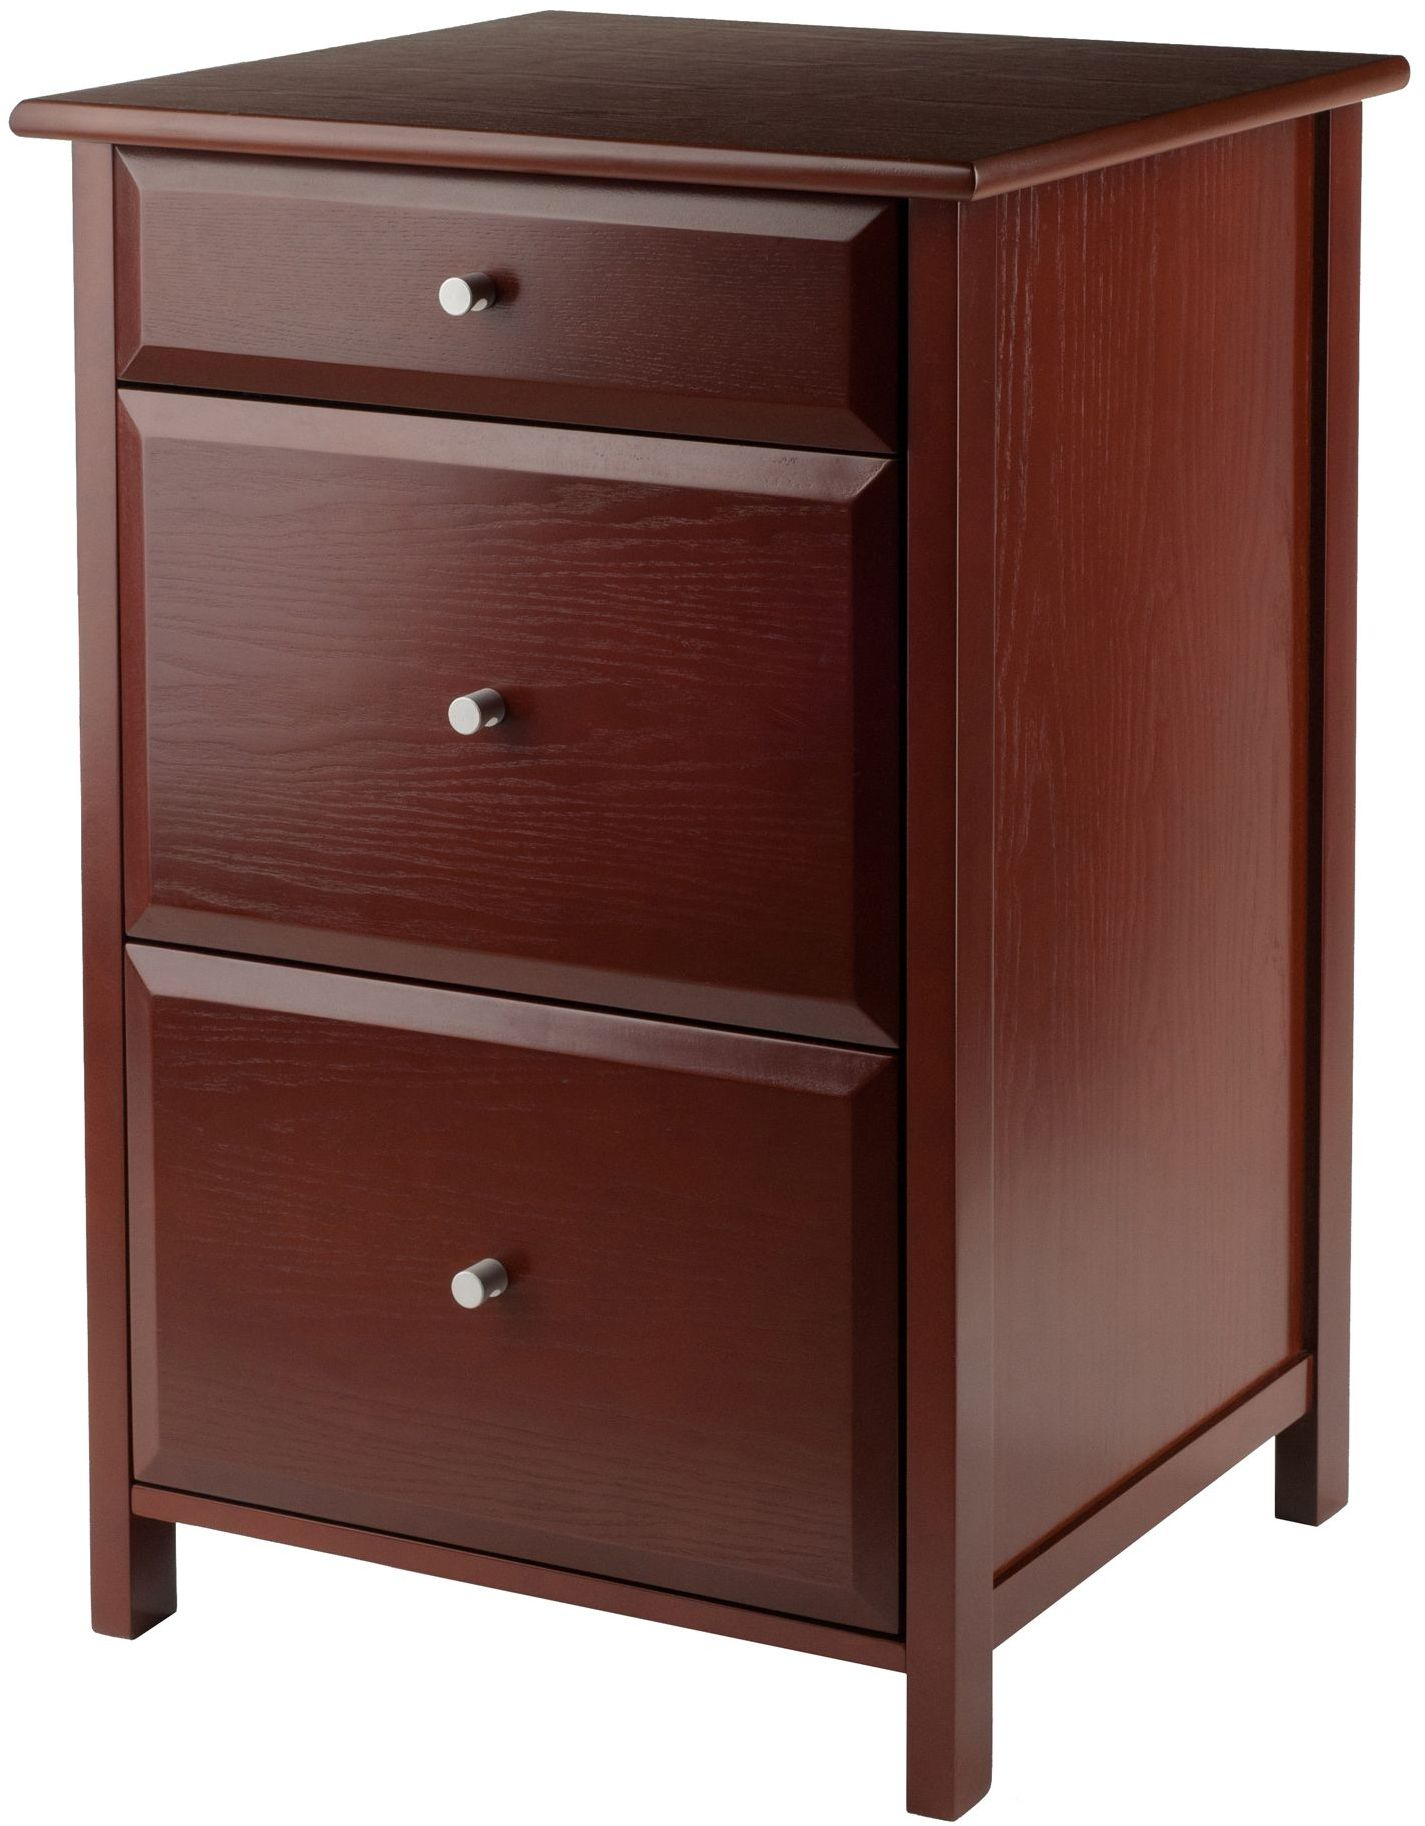 Delta Walnut File Cabinet From Winsomewood Coleman Furniture intended for sizing 1425 X 1826